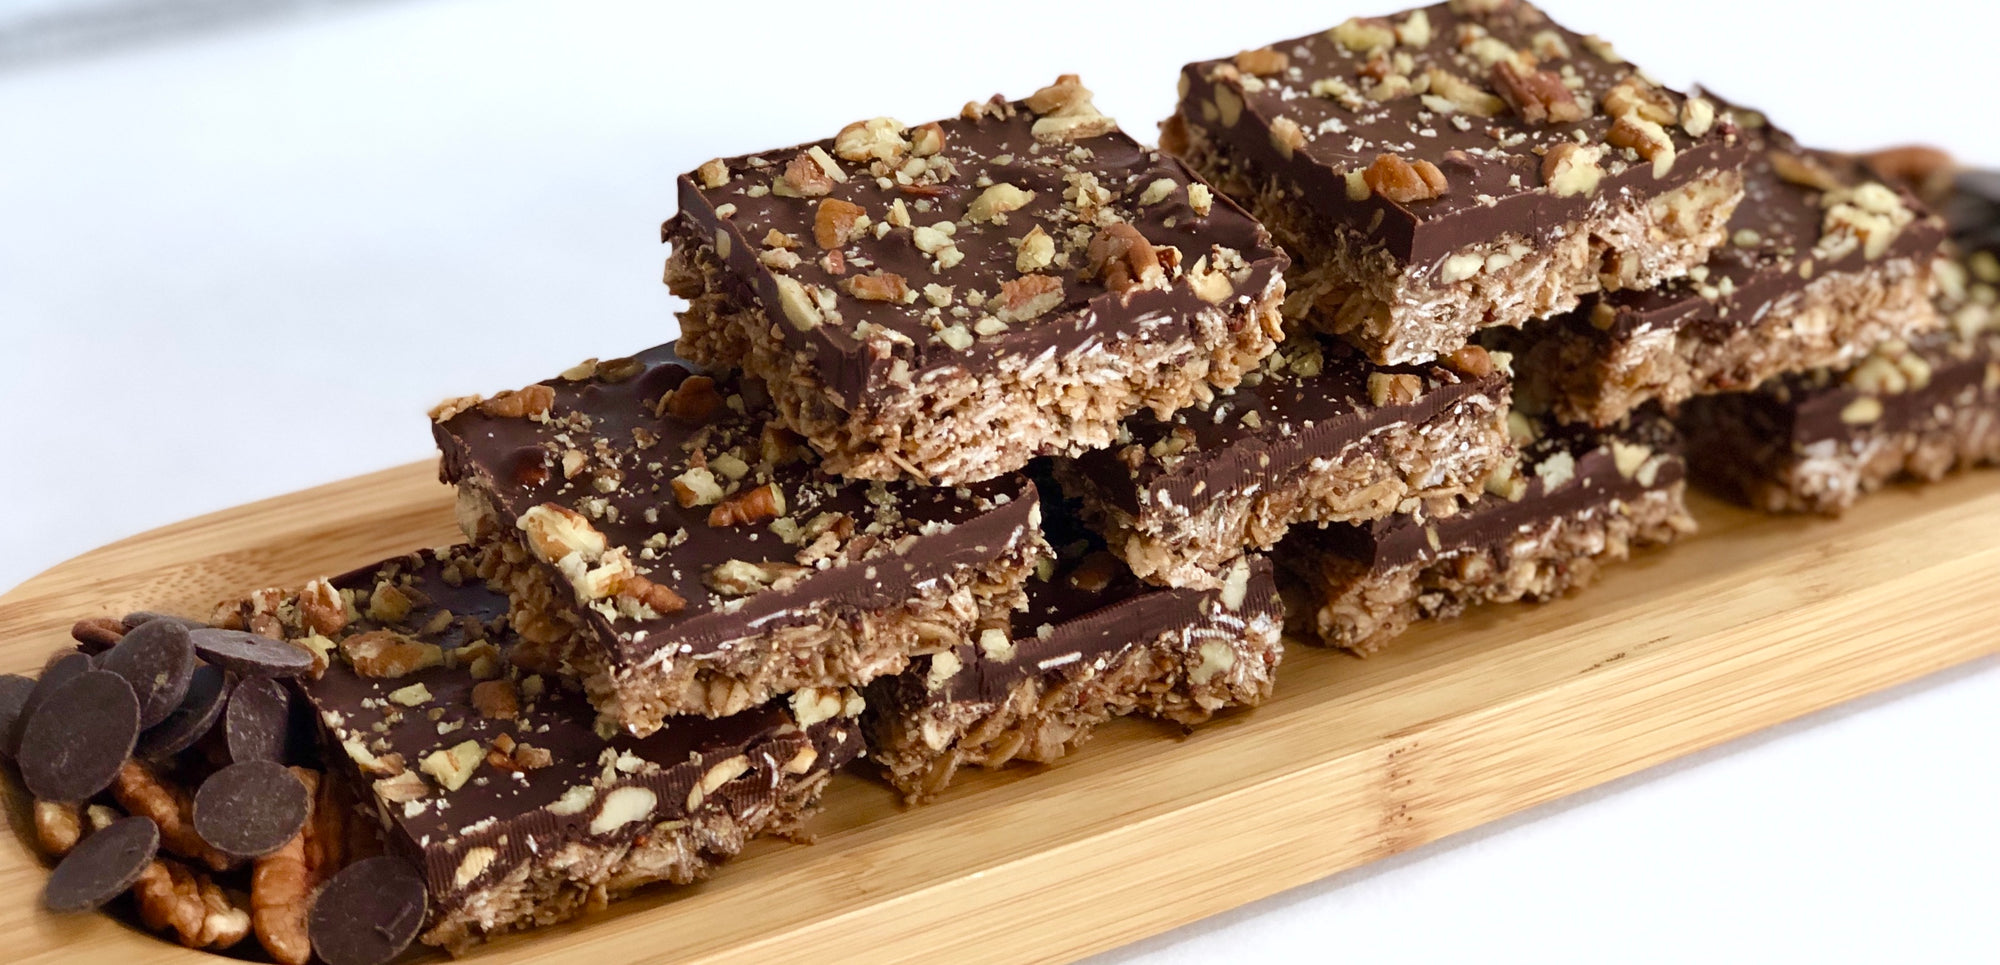 Not So Sinful Chocolate Peanut Butter Bars